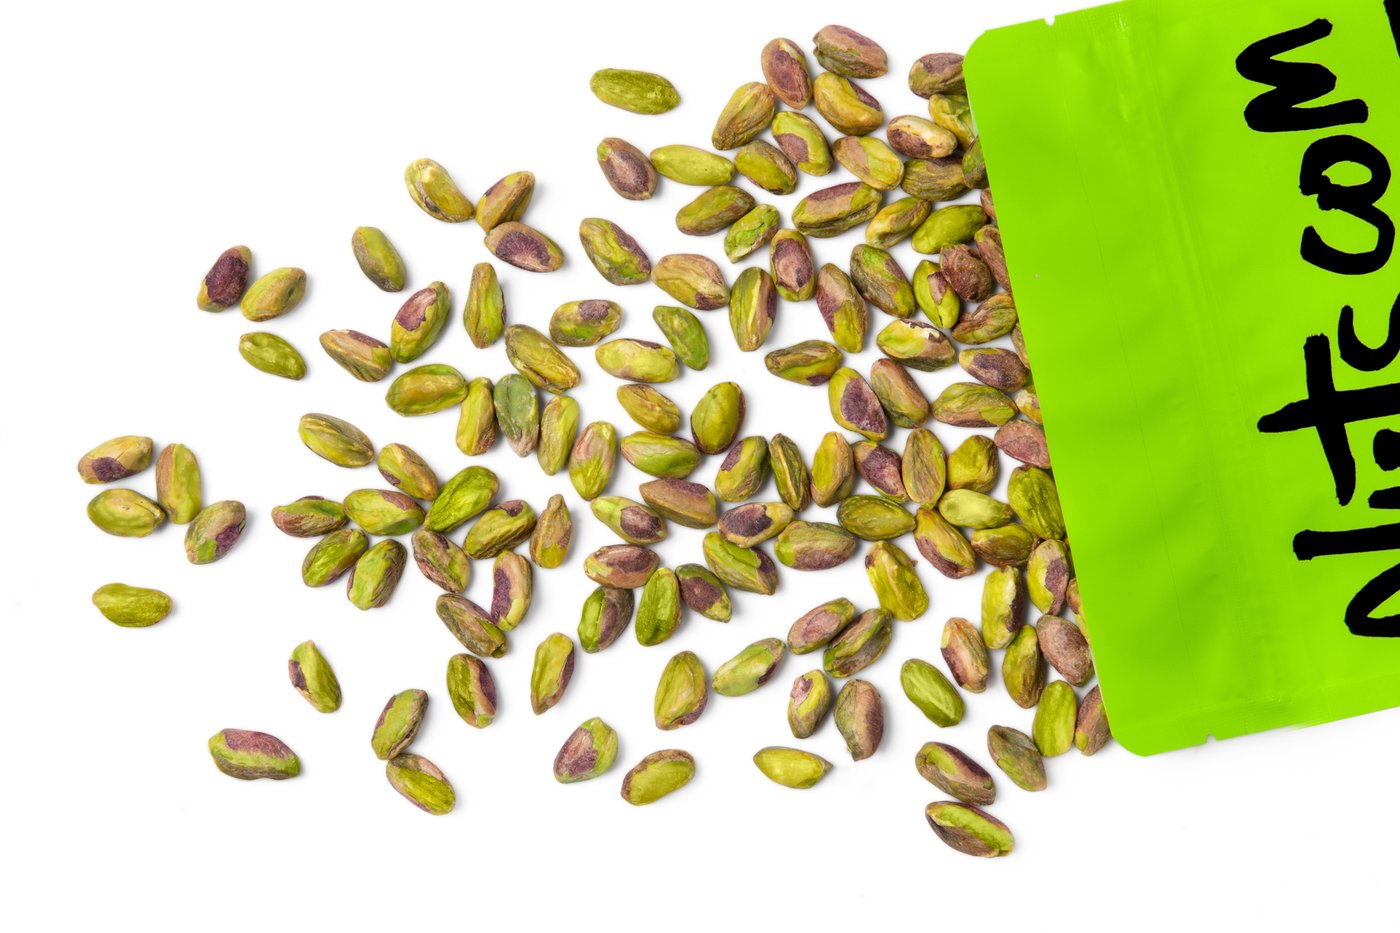 Dry-Roasted Pistachios (Unsalted, No Shell) photo